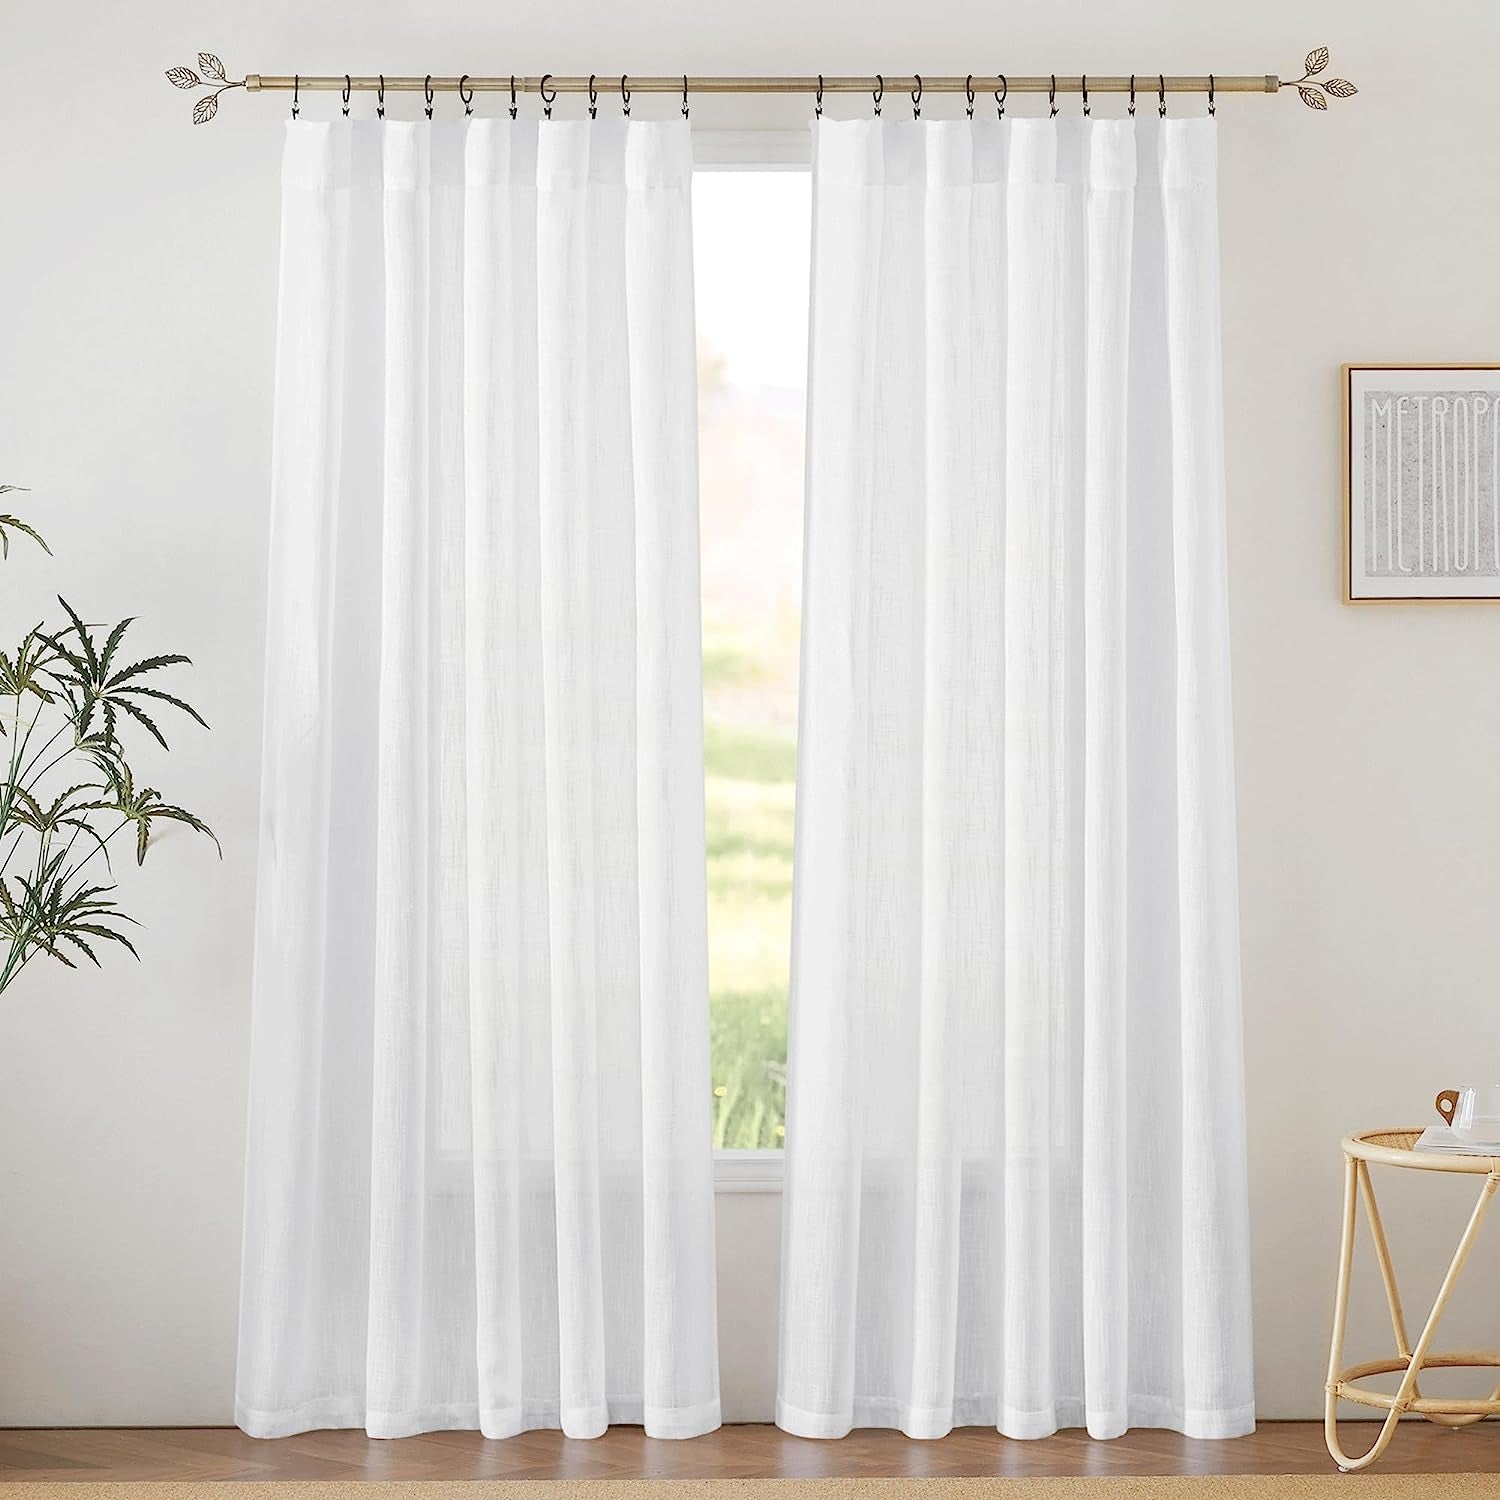 RYB HOME White Curtains & Drapes - Linen Textured Semi Sheer Curtains Privacy Panels for Living Room Bedroom Dining Bathroom Farmhouse Large Window Decor, W 70 X L 63, 2 Pcs  RYB HOME   